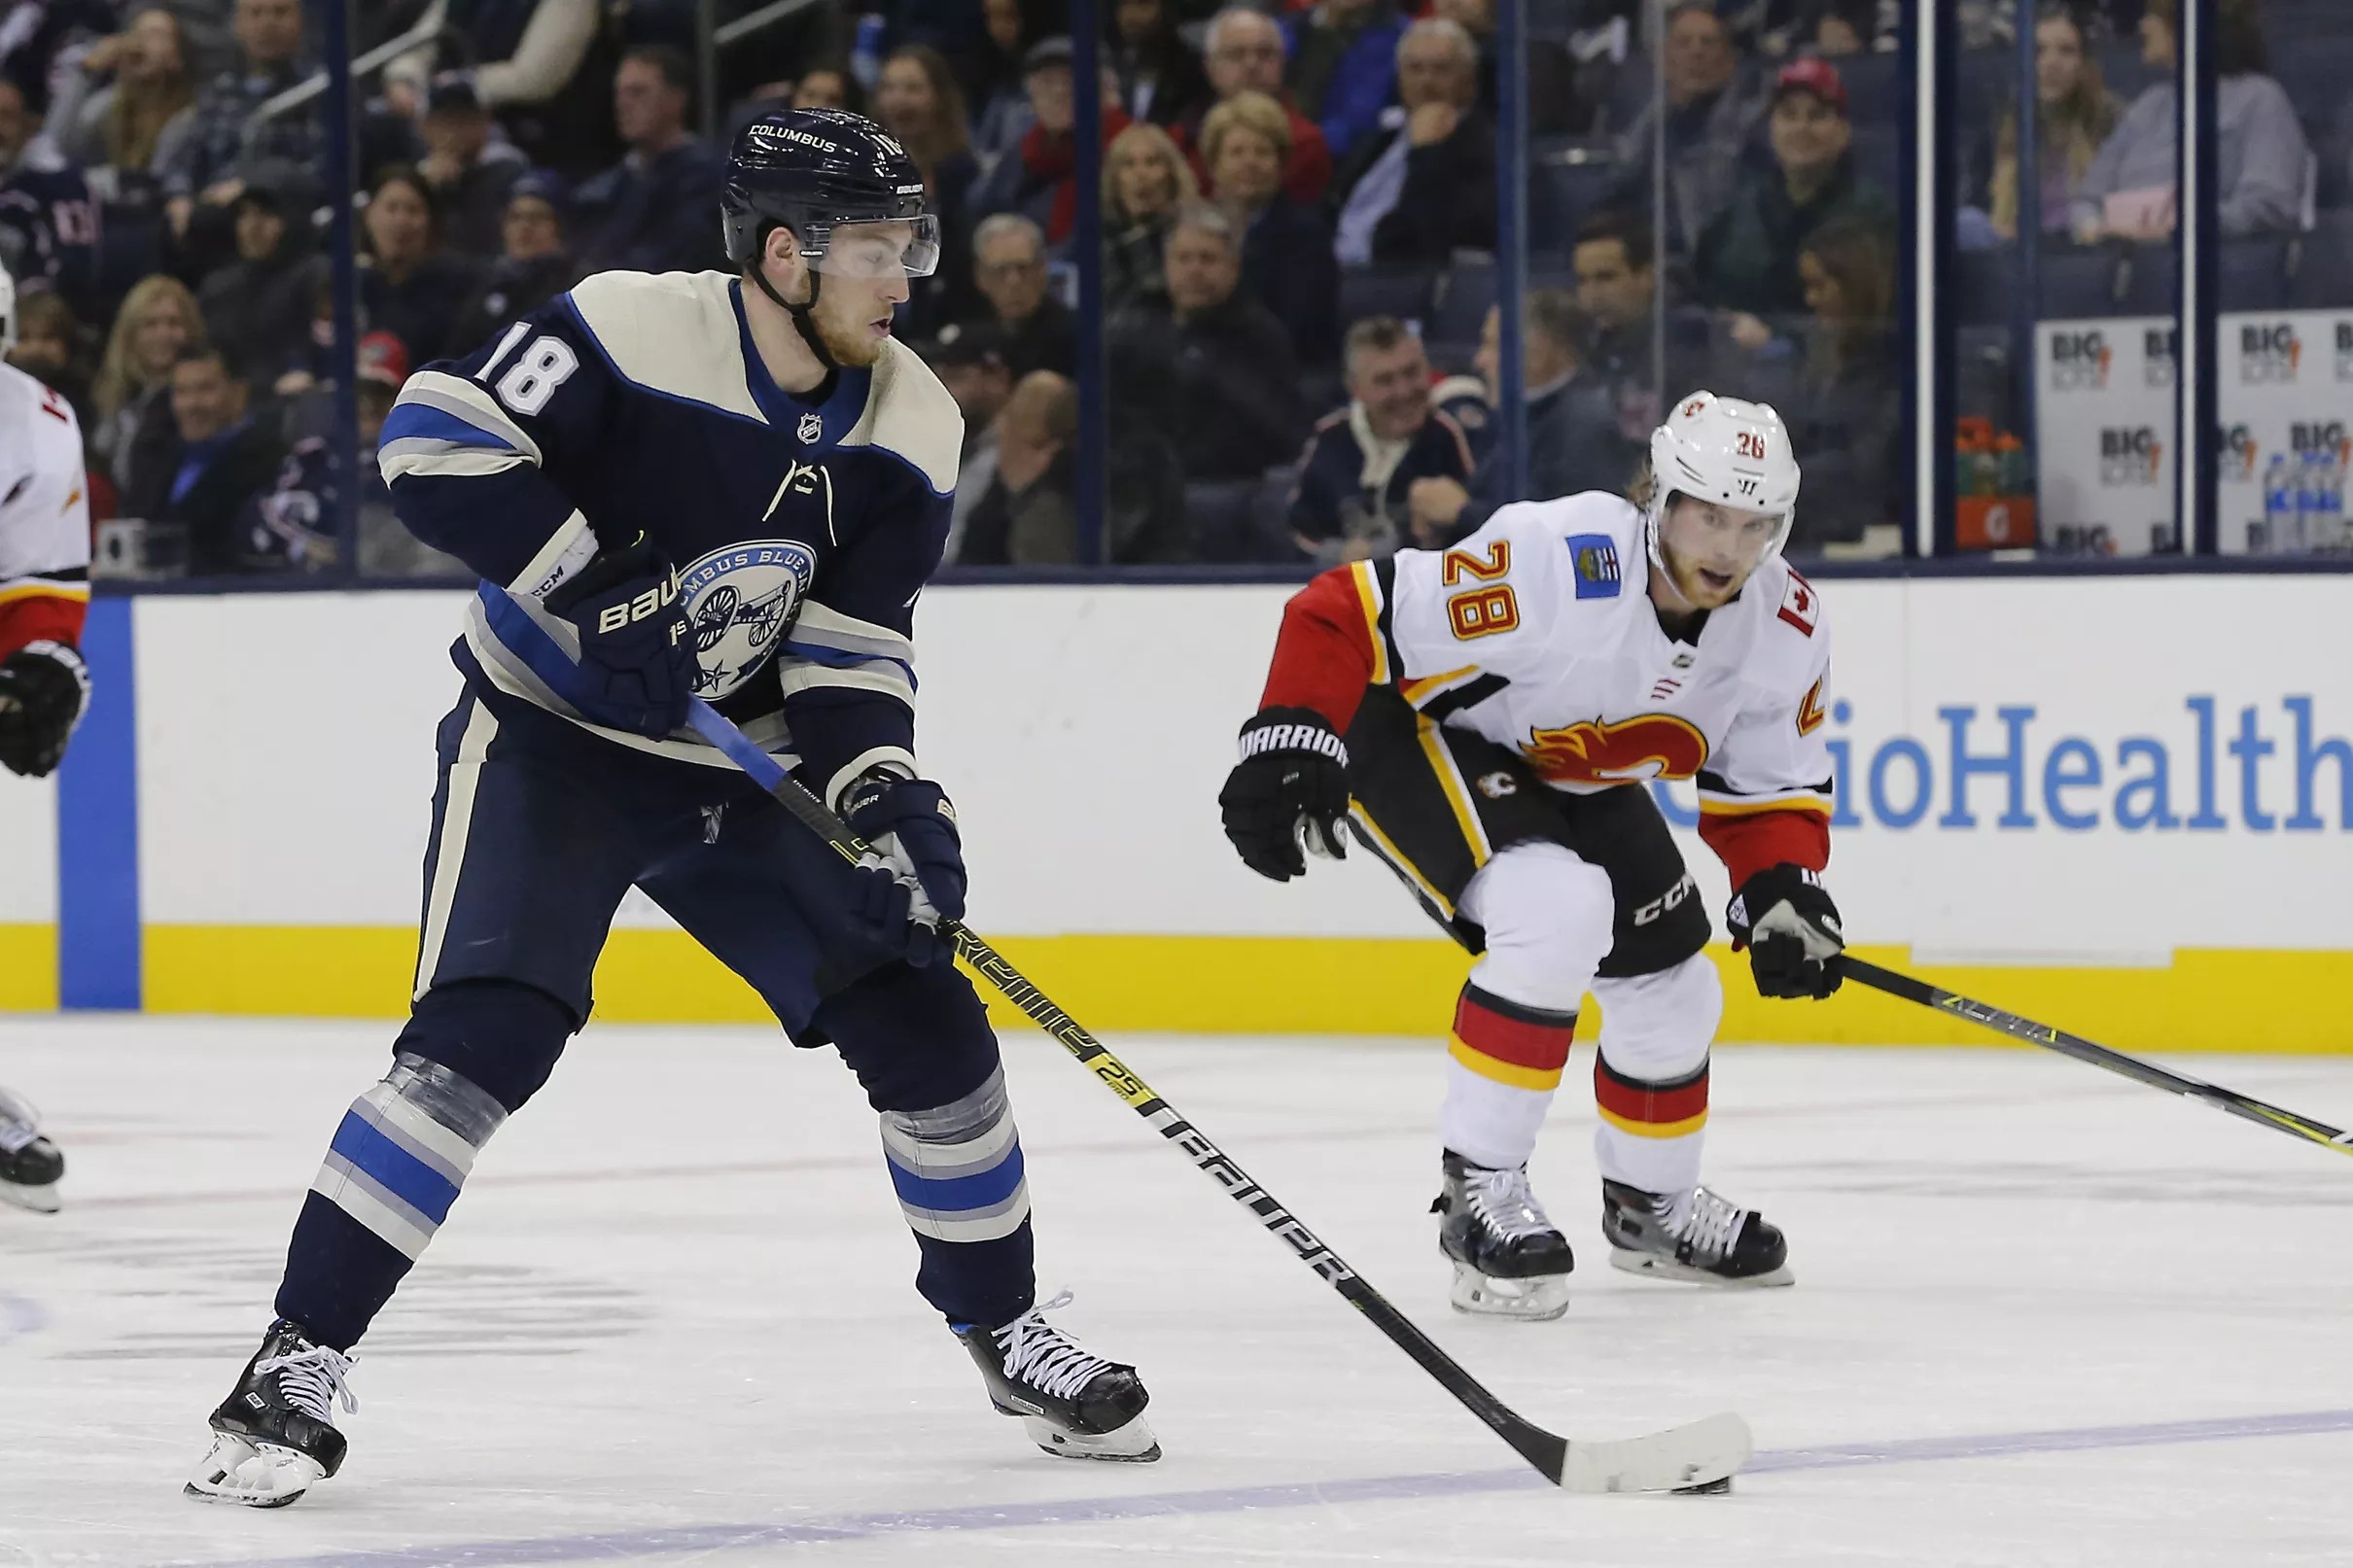 Game #73 Preview: Blue Jackets Try to Put Out Flames